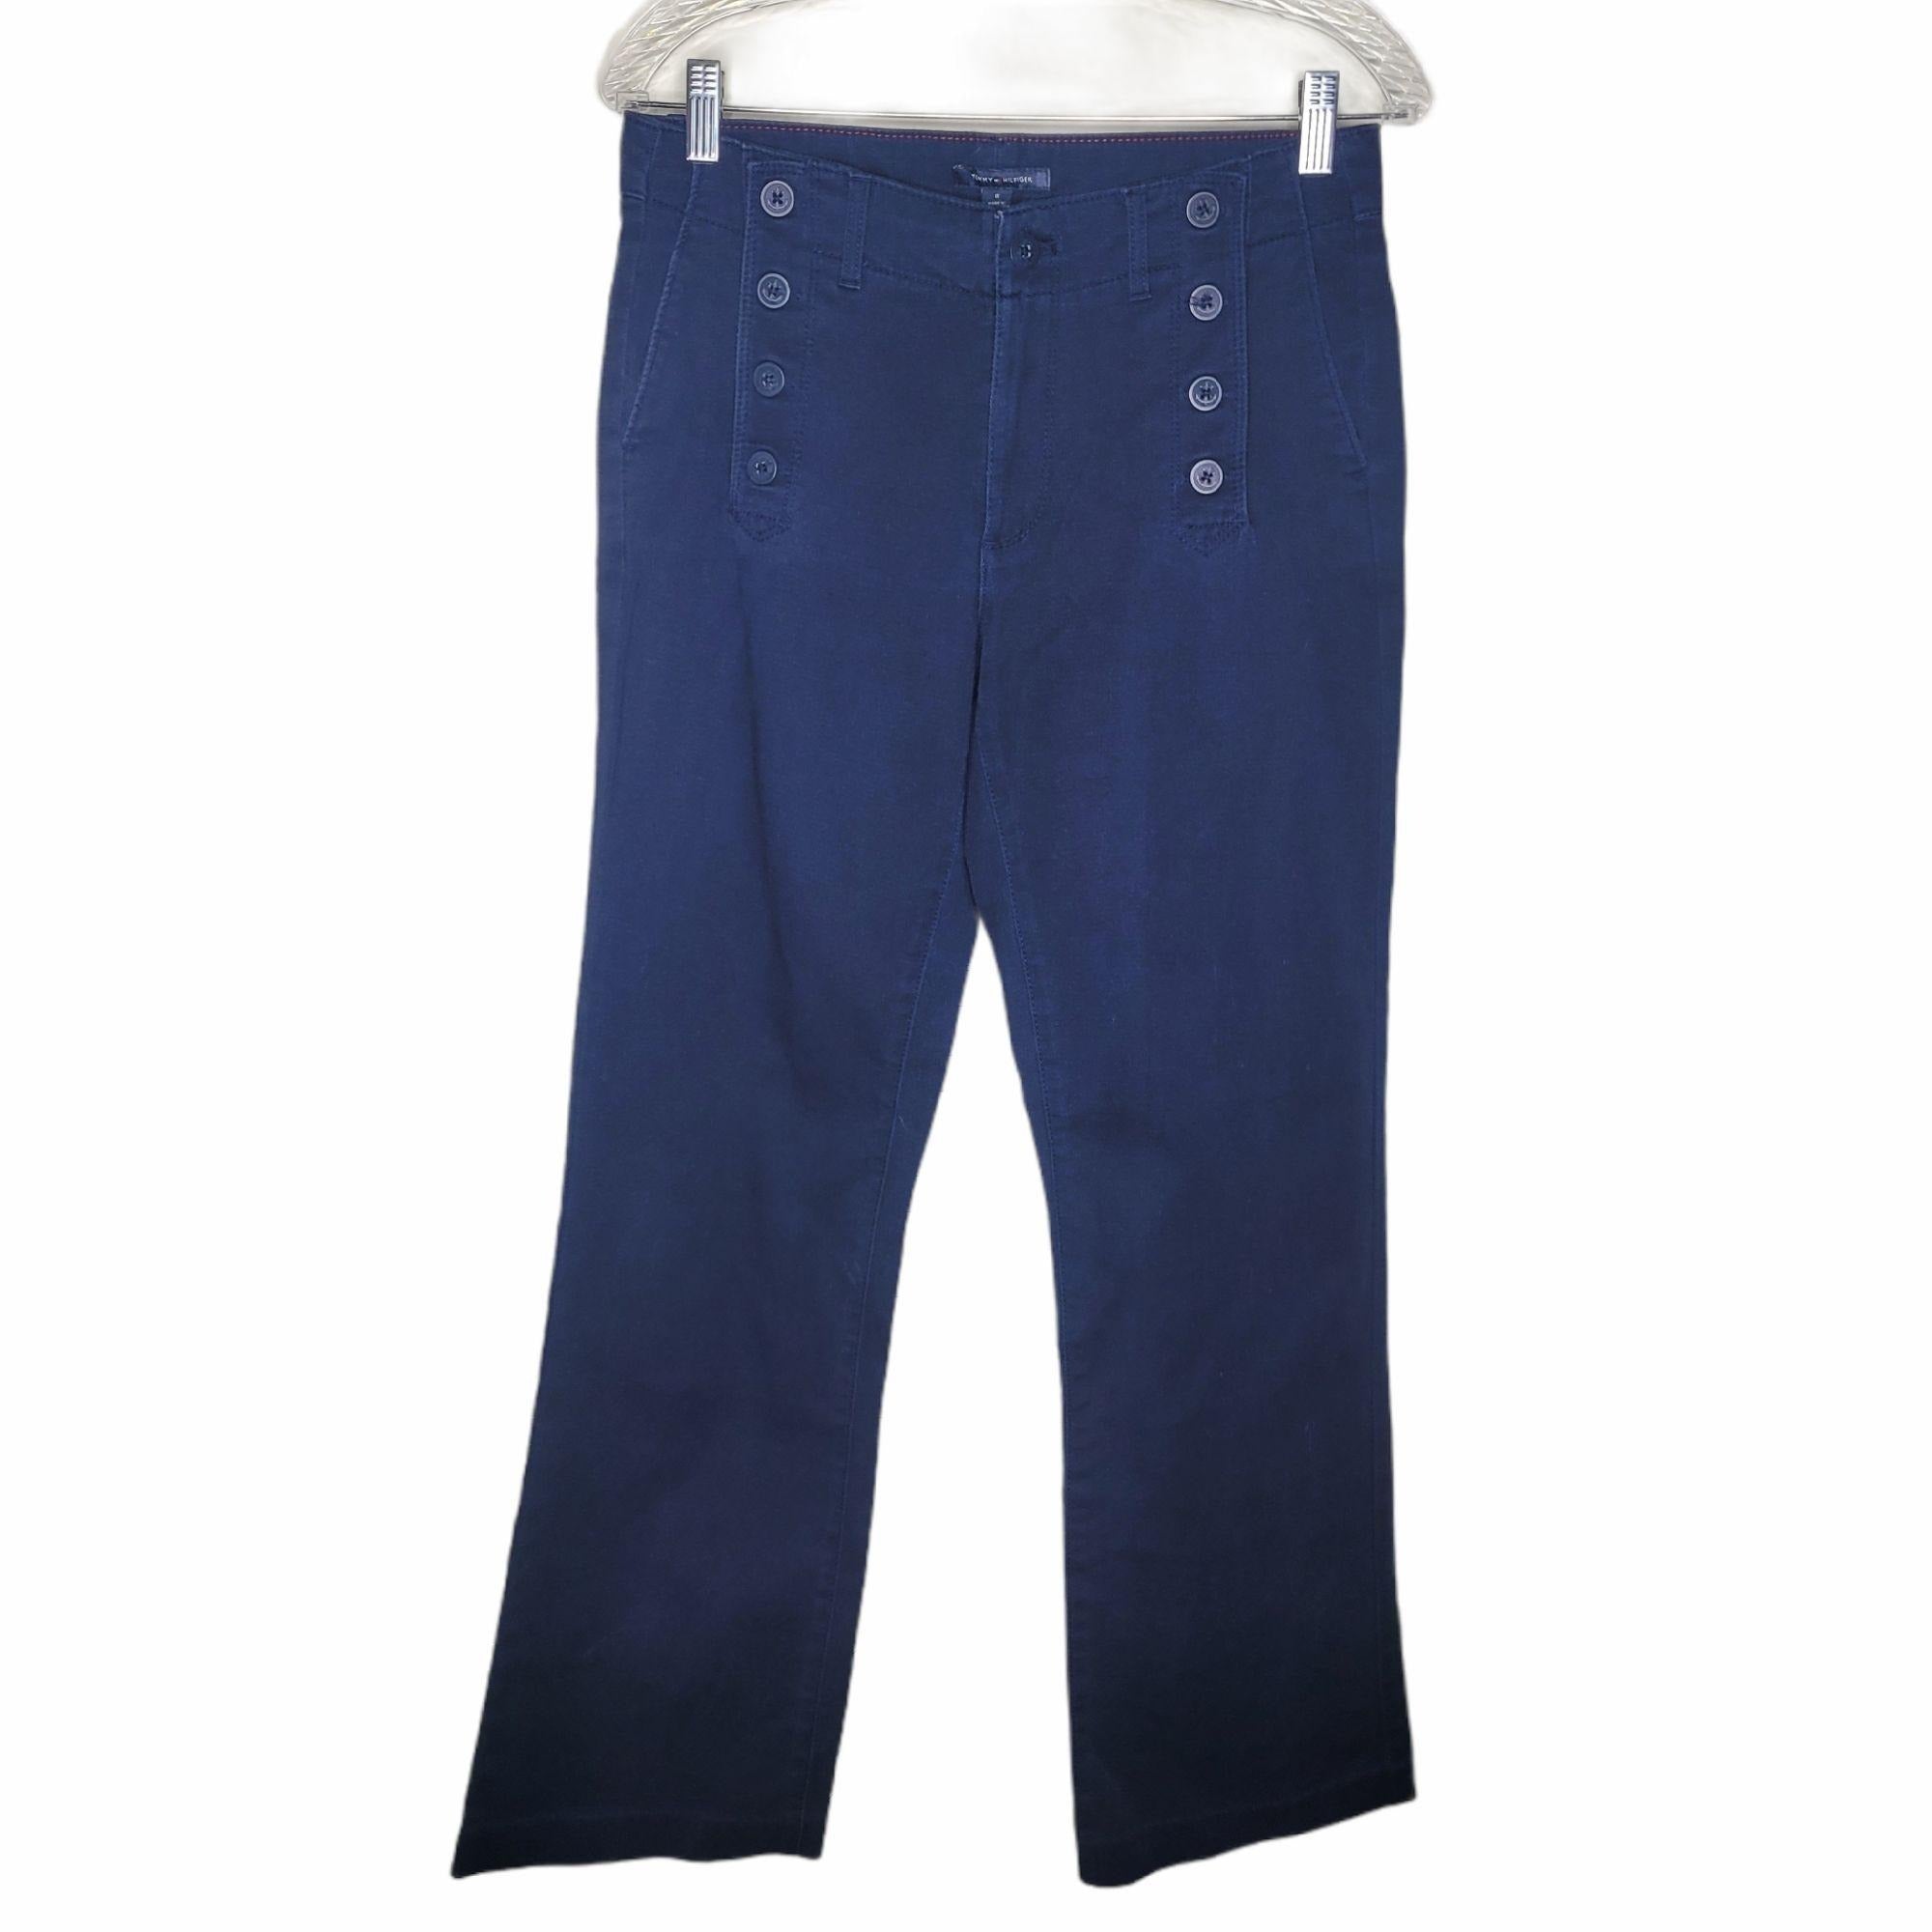 Tommy Hilfiger Women's Blue Pants with Button Accents Size 8